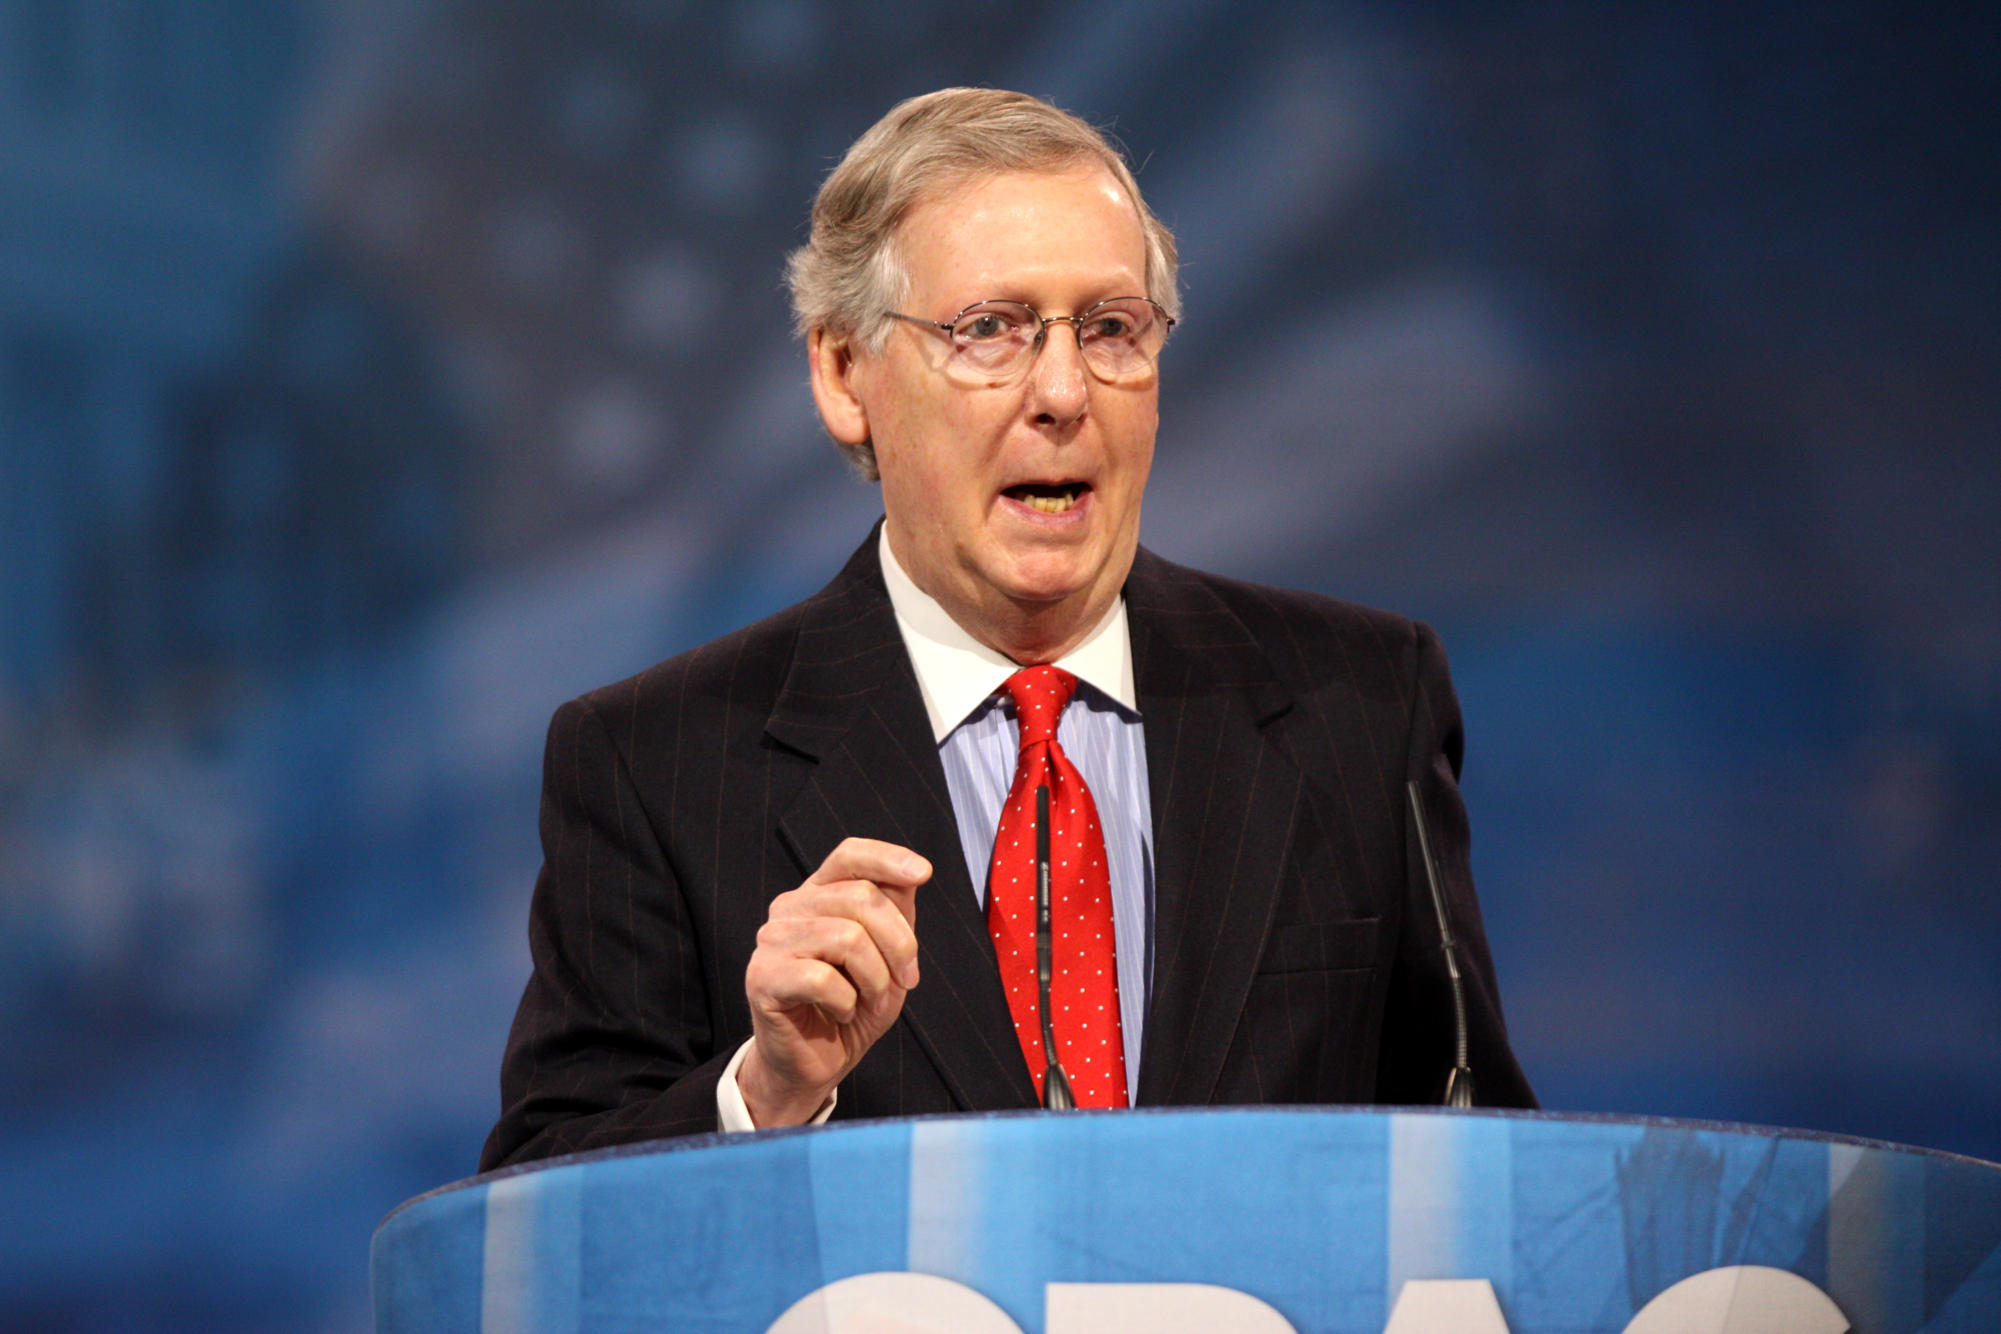 Mitch McConnell, photo by
Gage Skidmore, Flickr